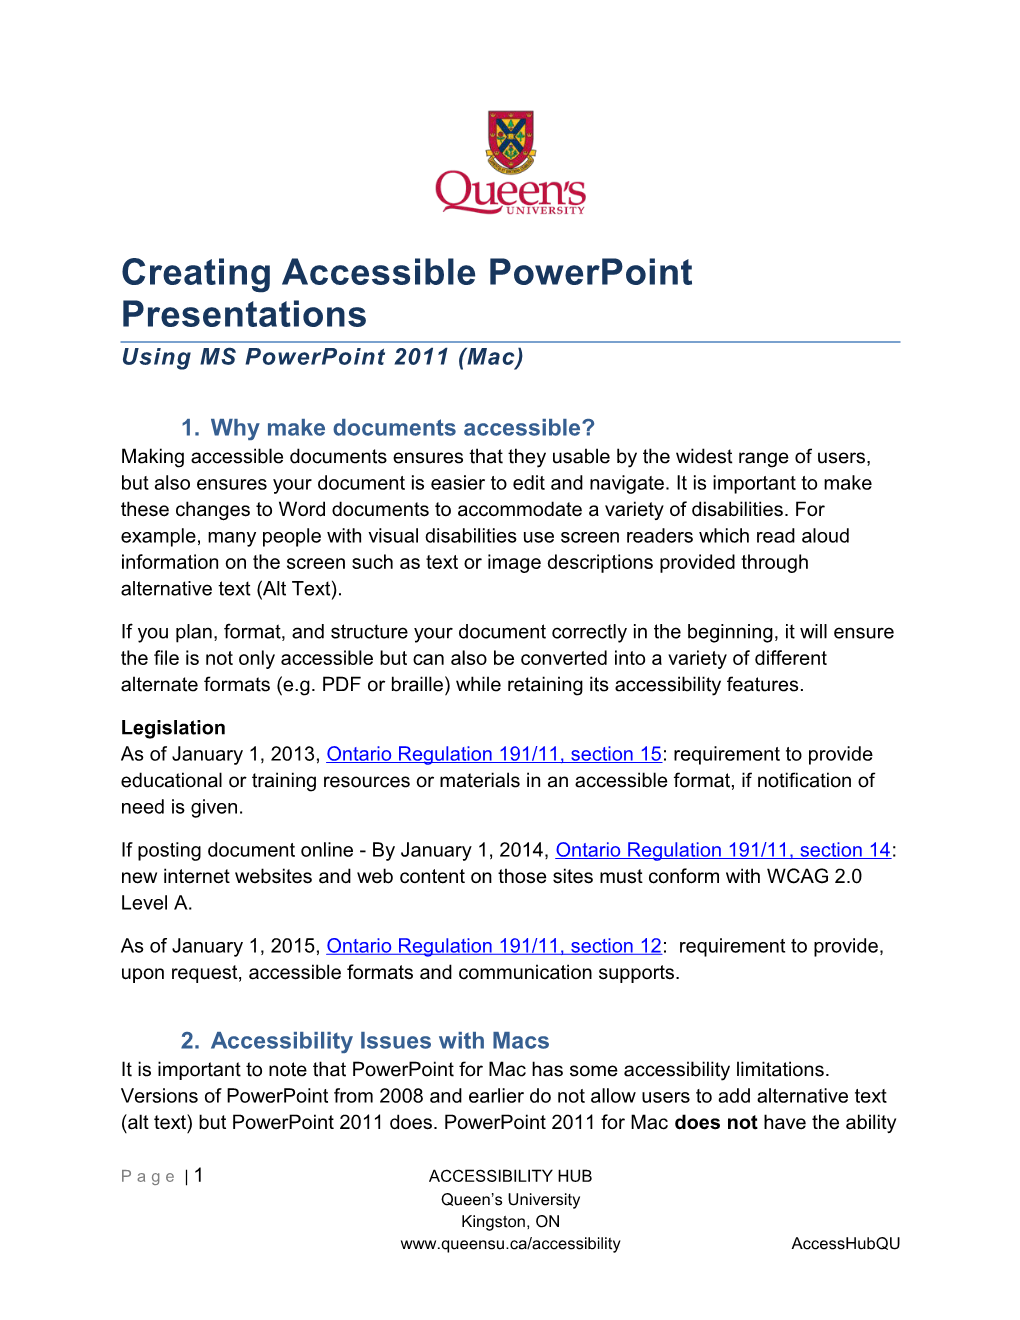 Creating Accessible Powerpoint Presentations Using MS Powerpoint 2011 (Mac)